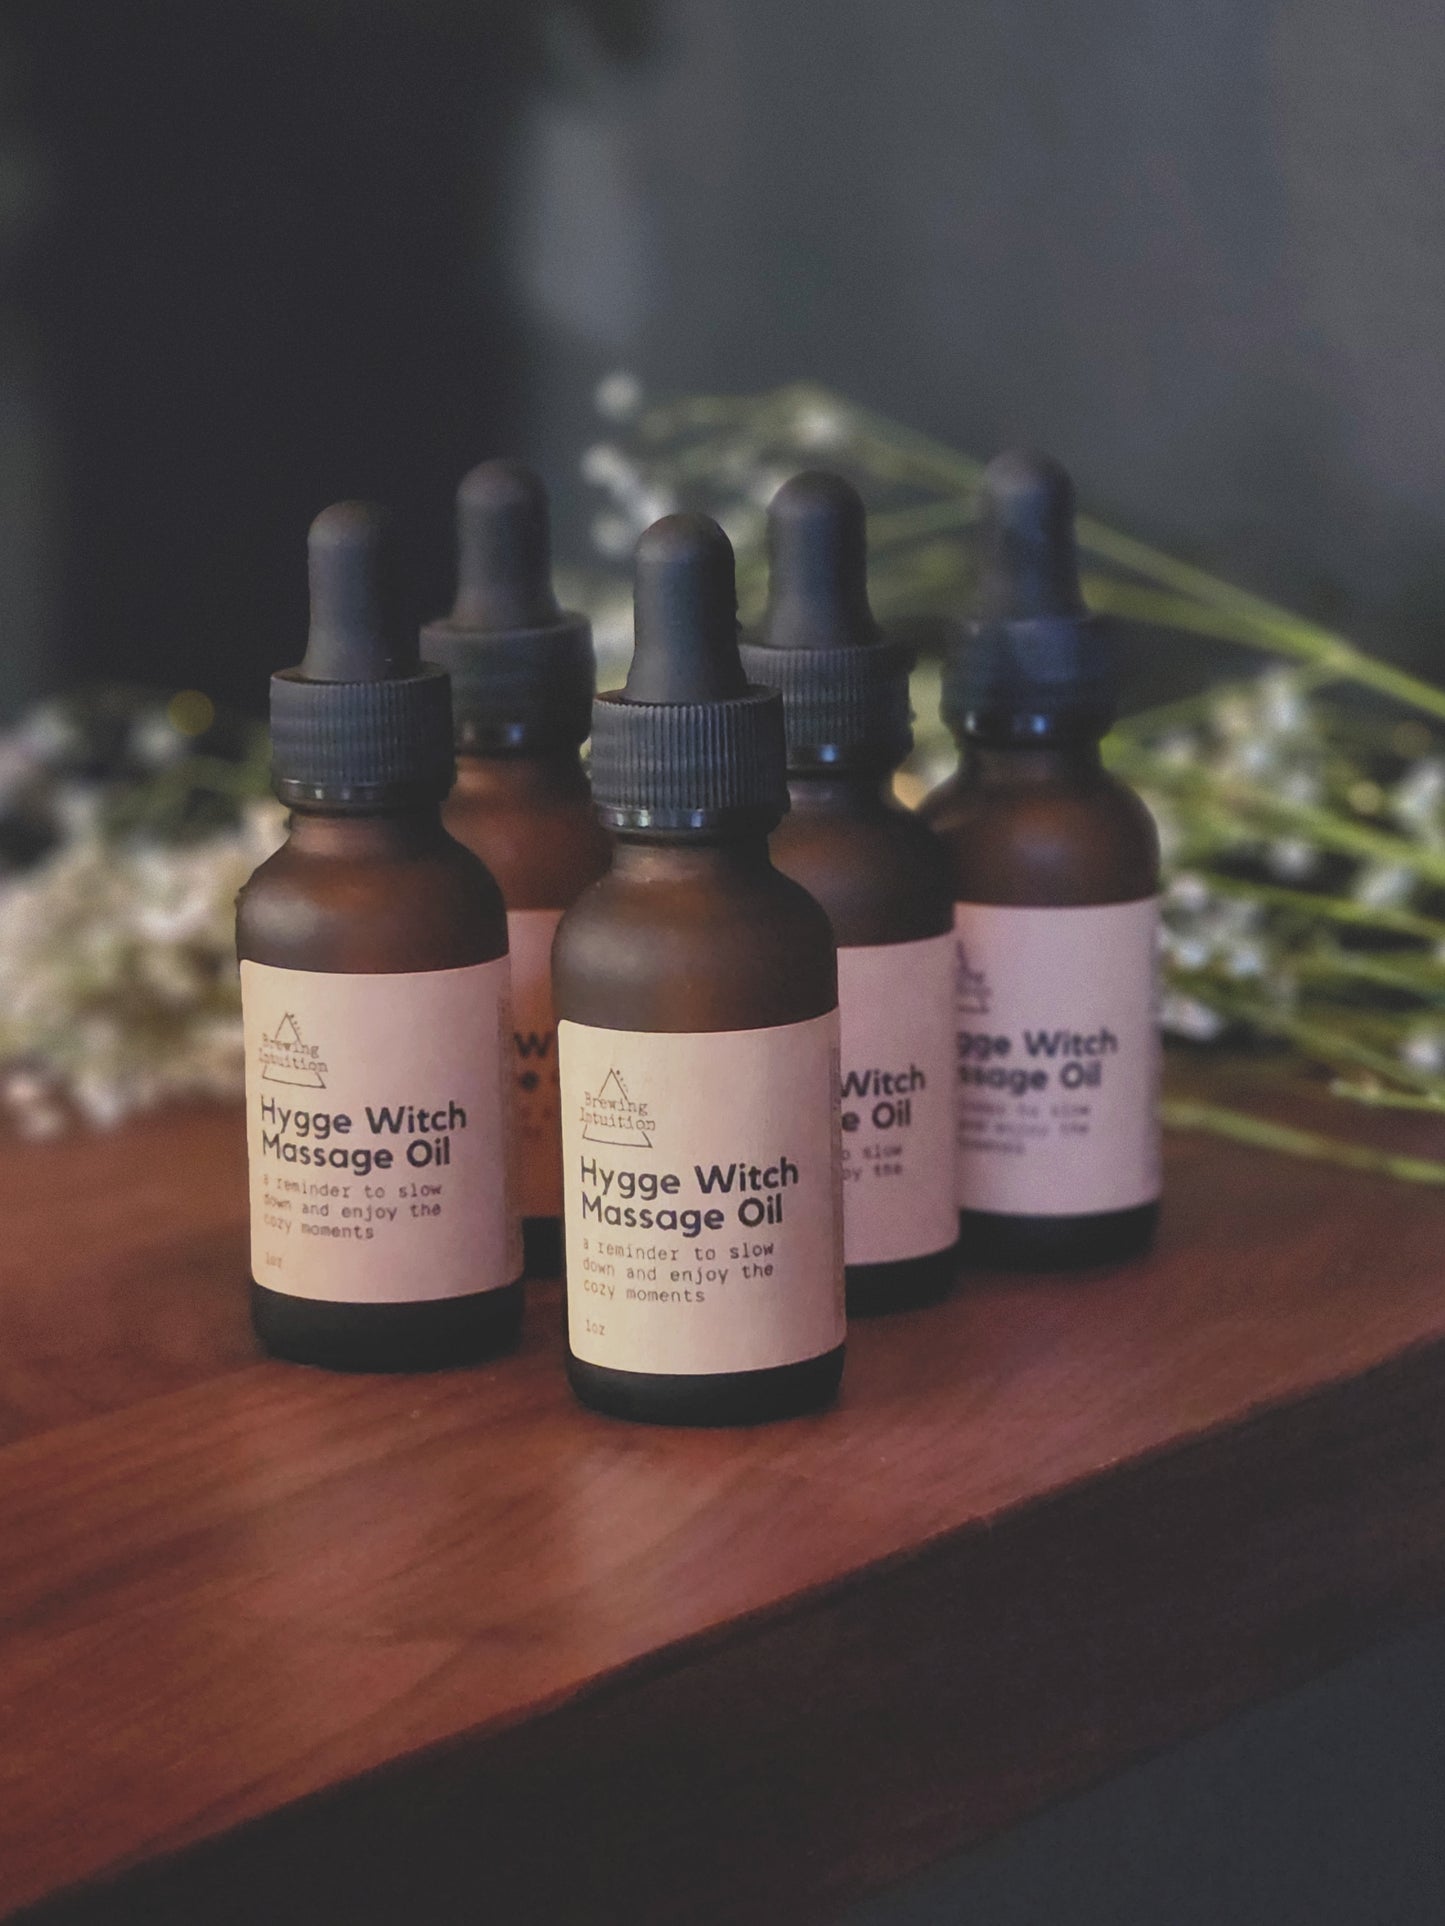 Hygge Witch Massage Oil